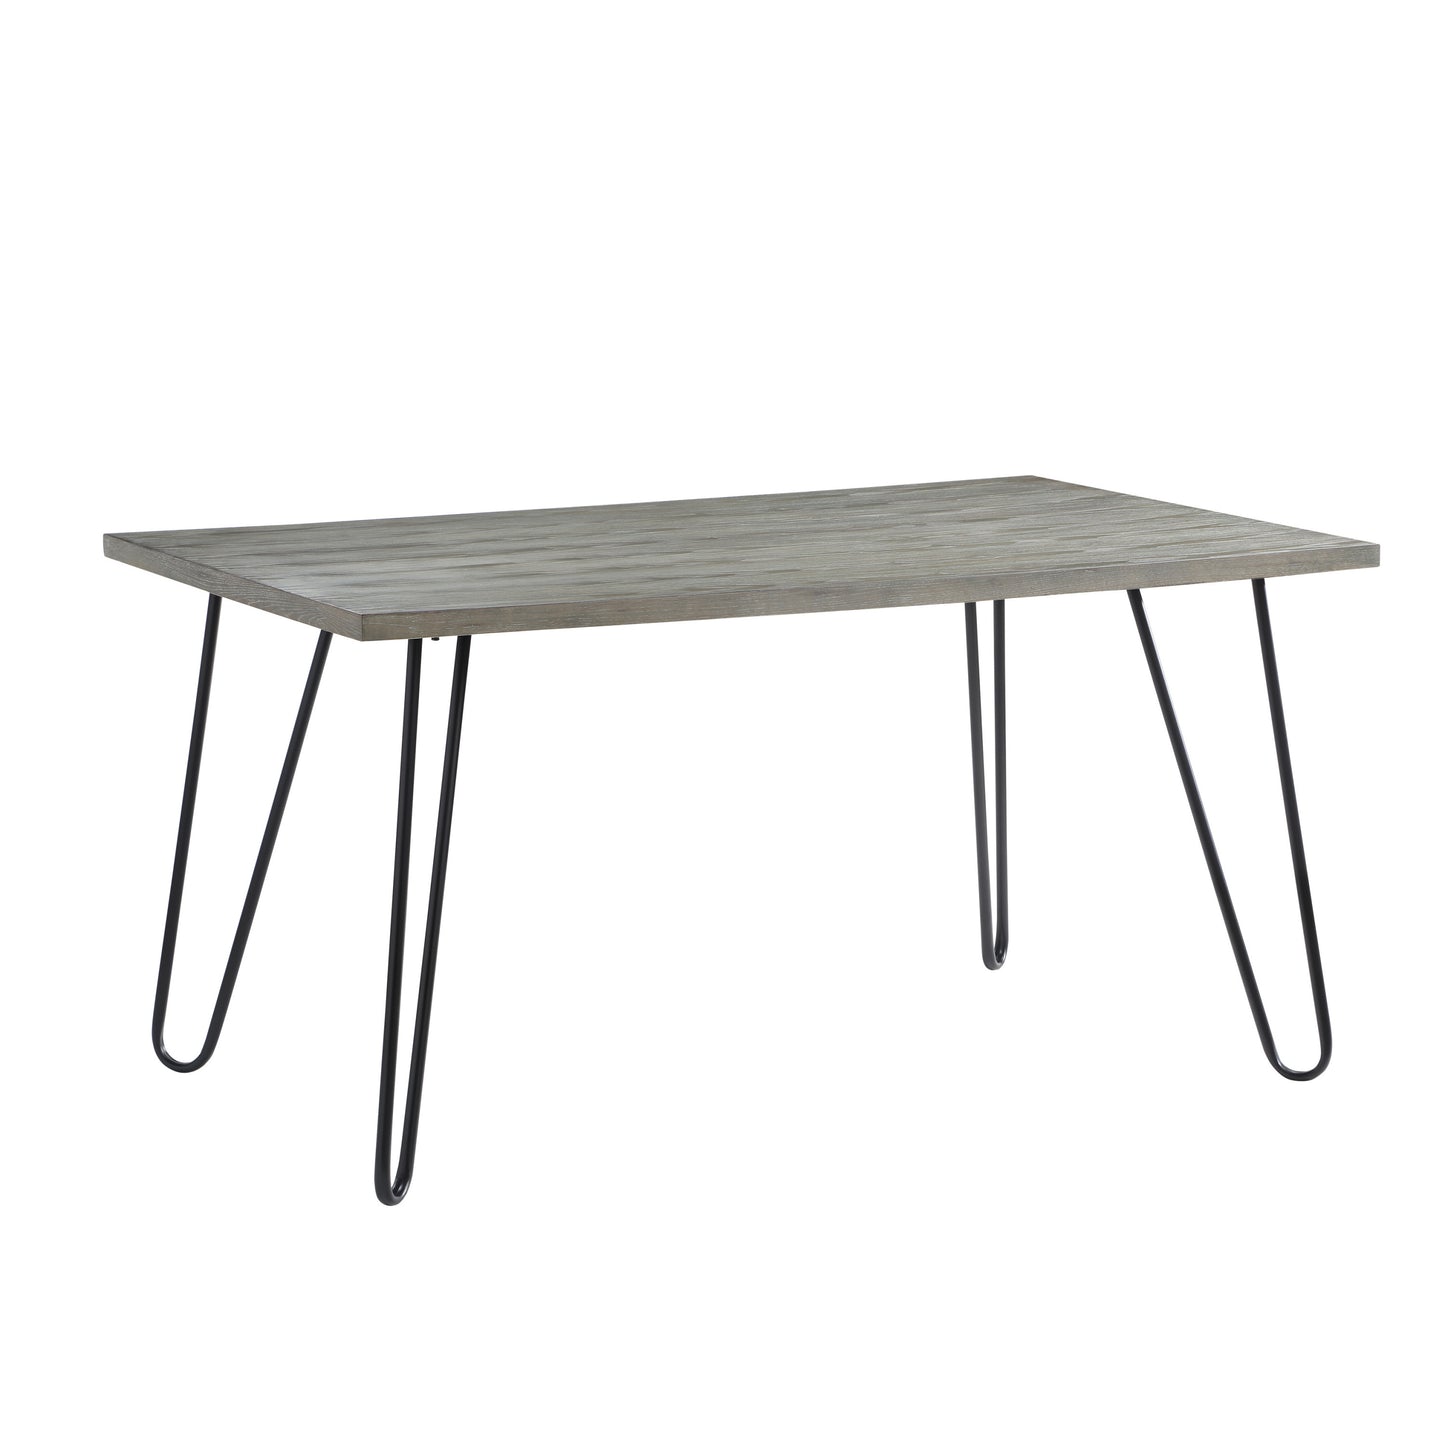 Melbourne Gray 5 Piece Dining Table Set